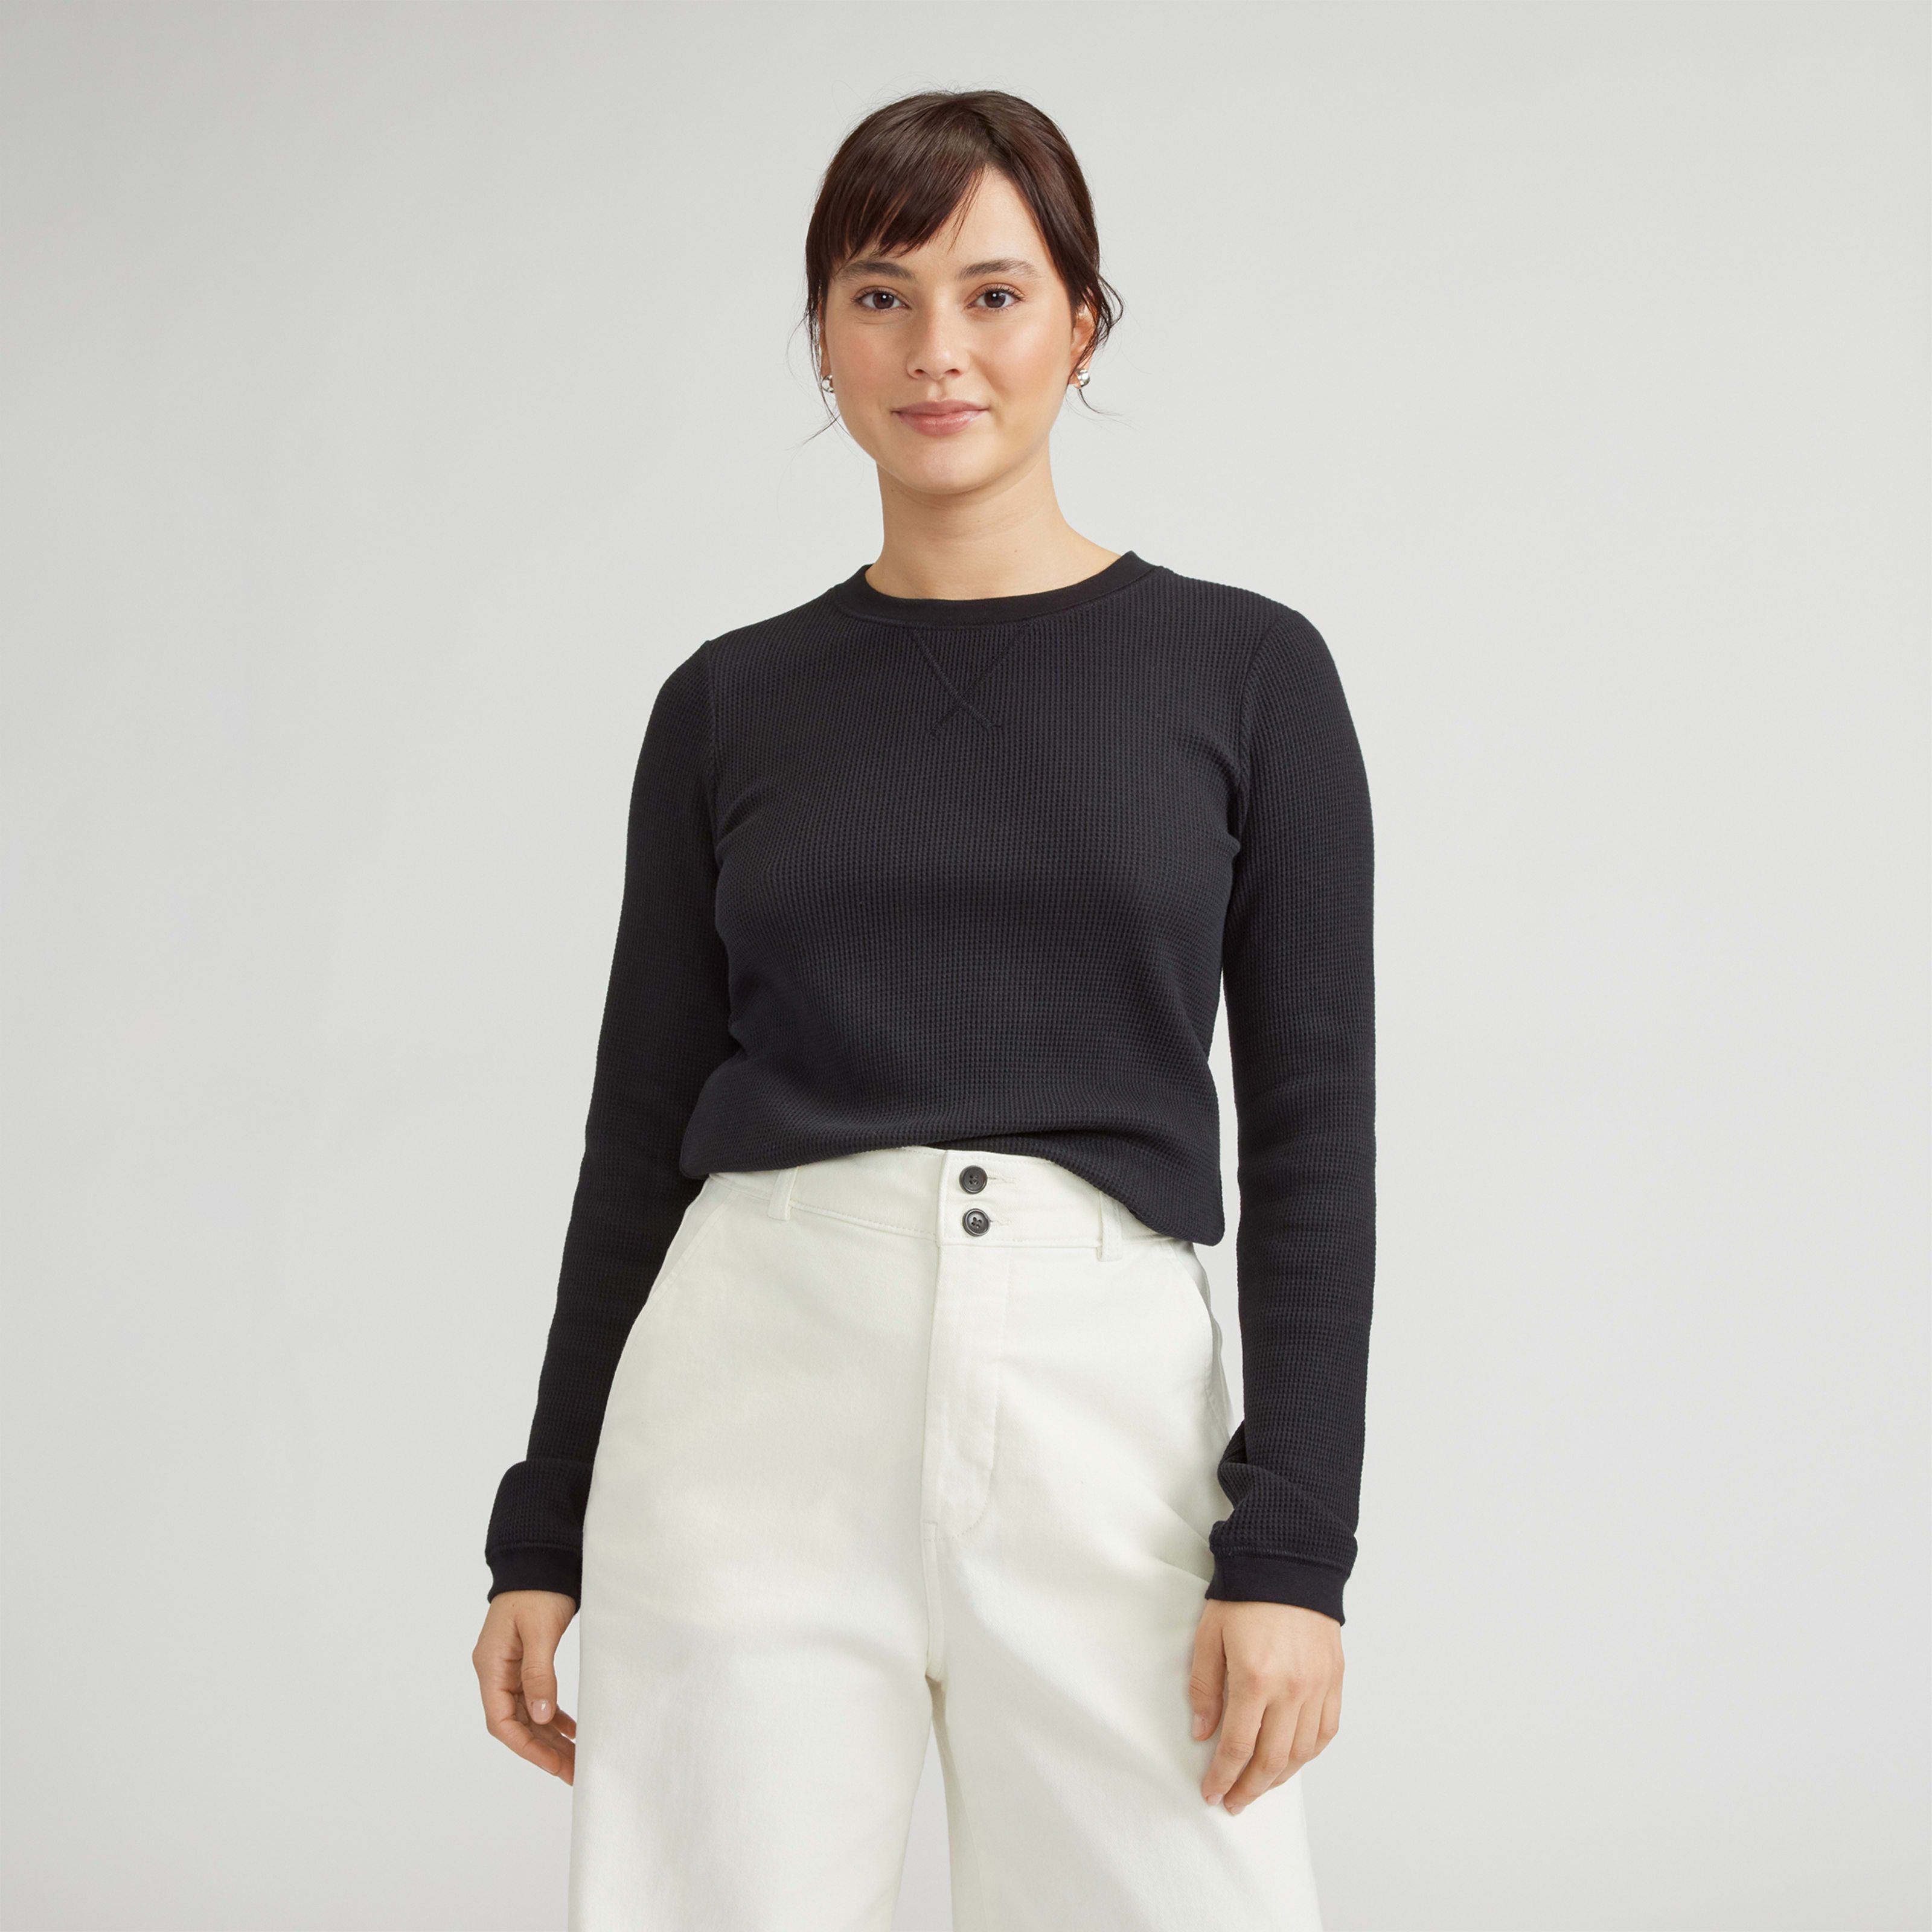 Women's Organic Cotton Waffle T-Shirt by Everlane in Washed Black, Size L | Everlane